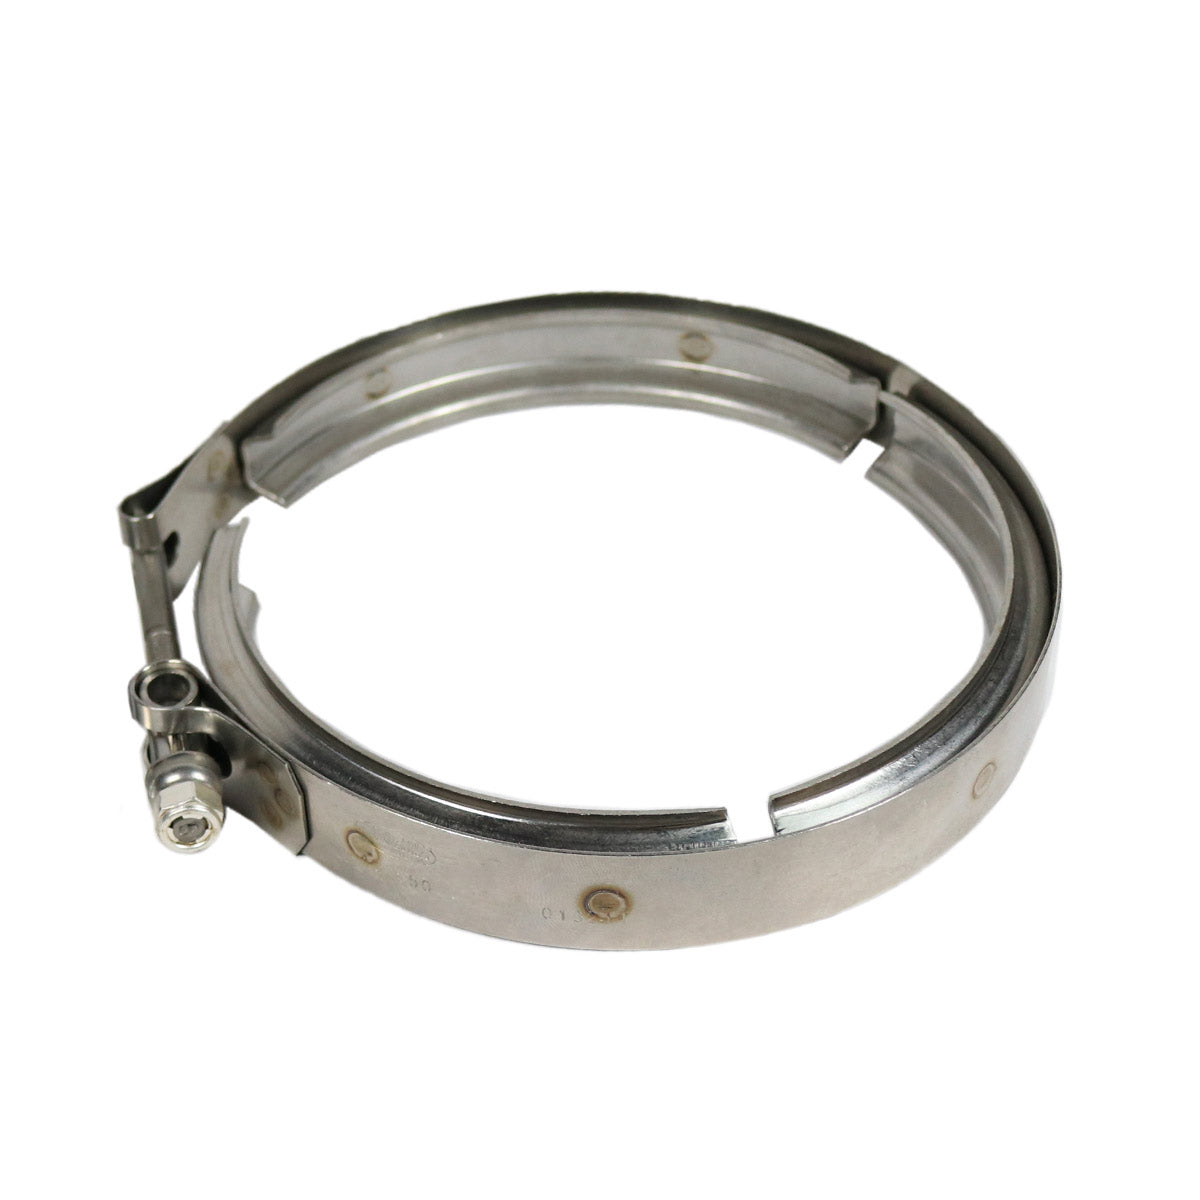 PROLINE 5.00" V-BAND CLAMP / 5" THROTTLE BODY CLAMP